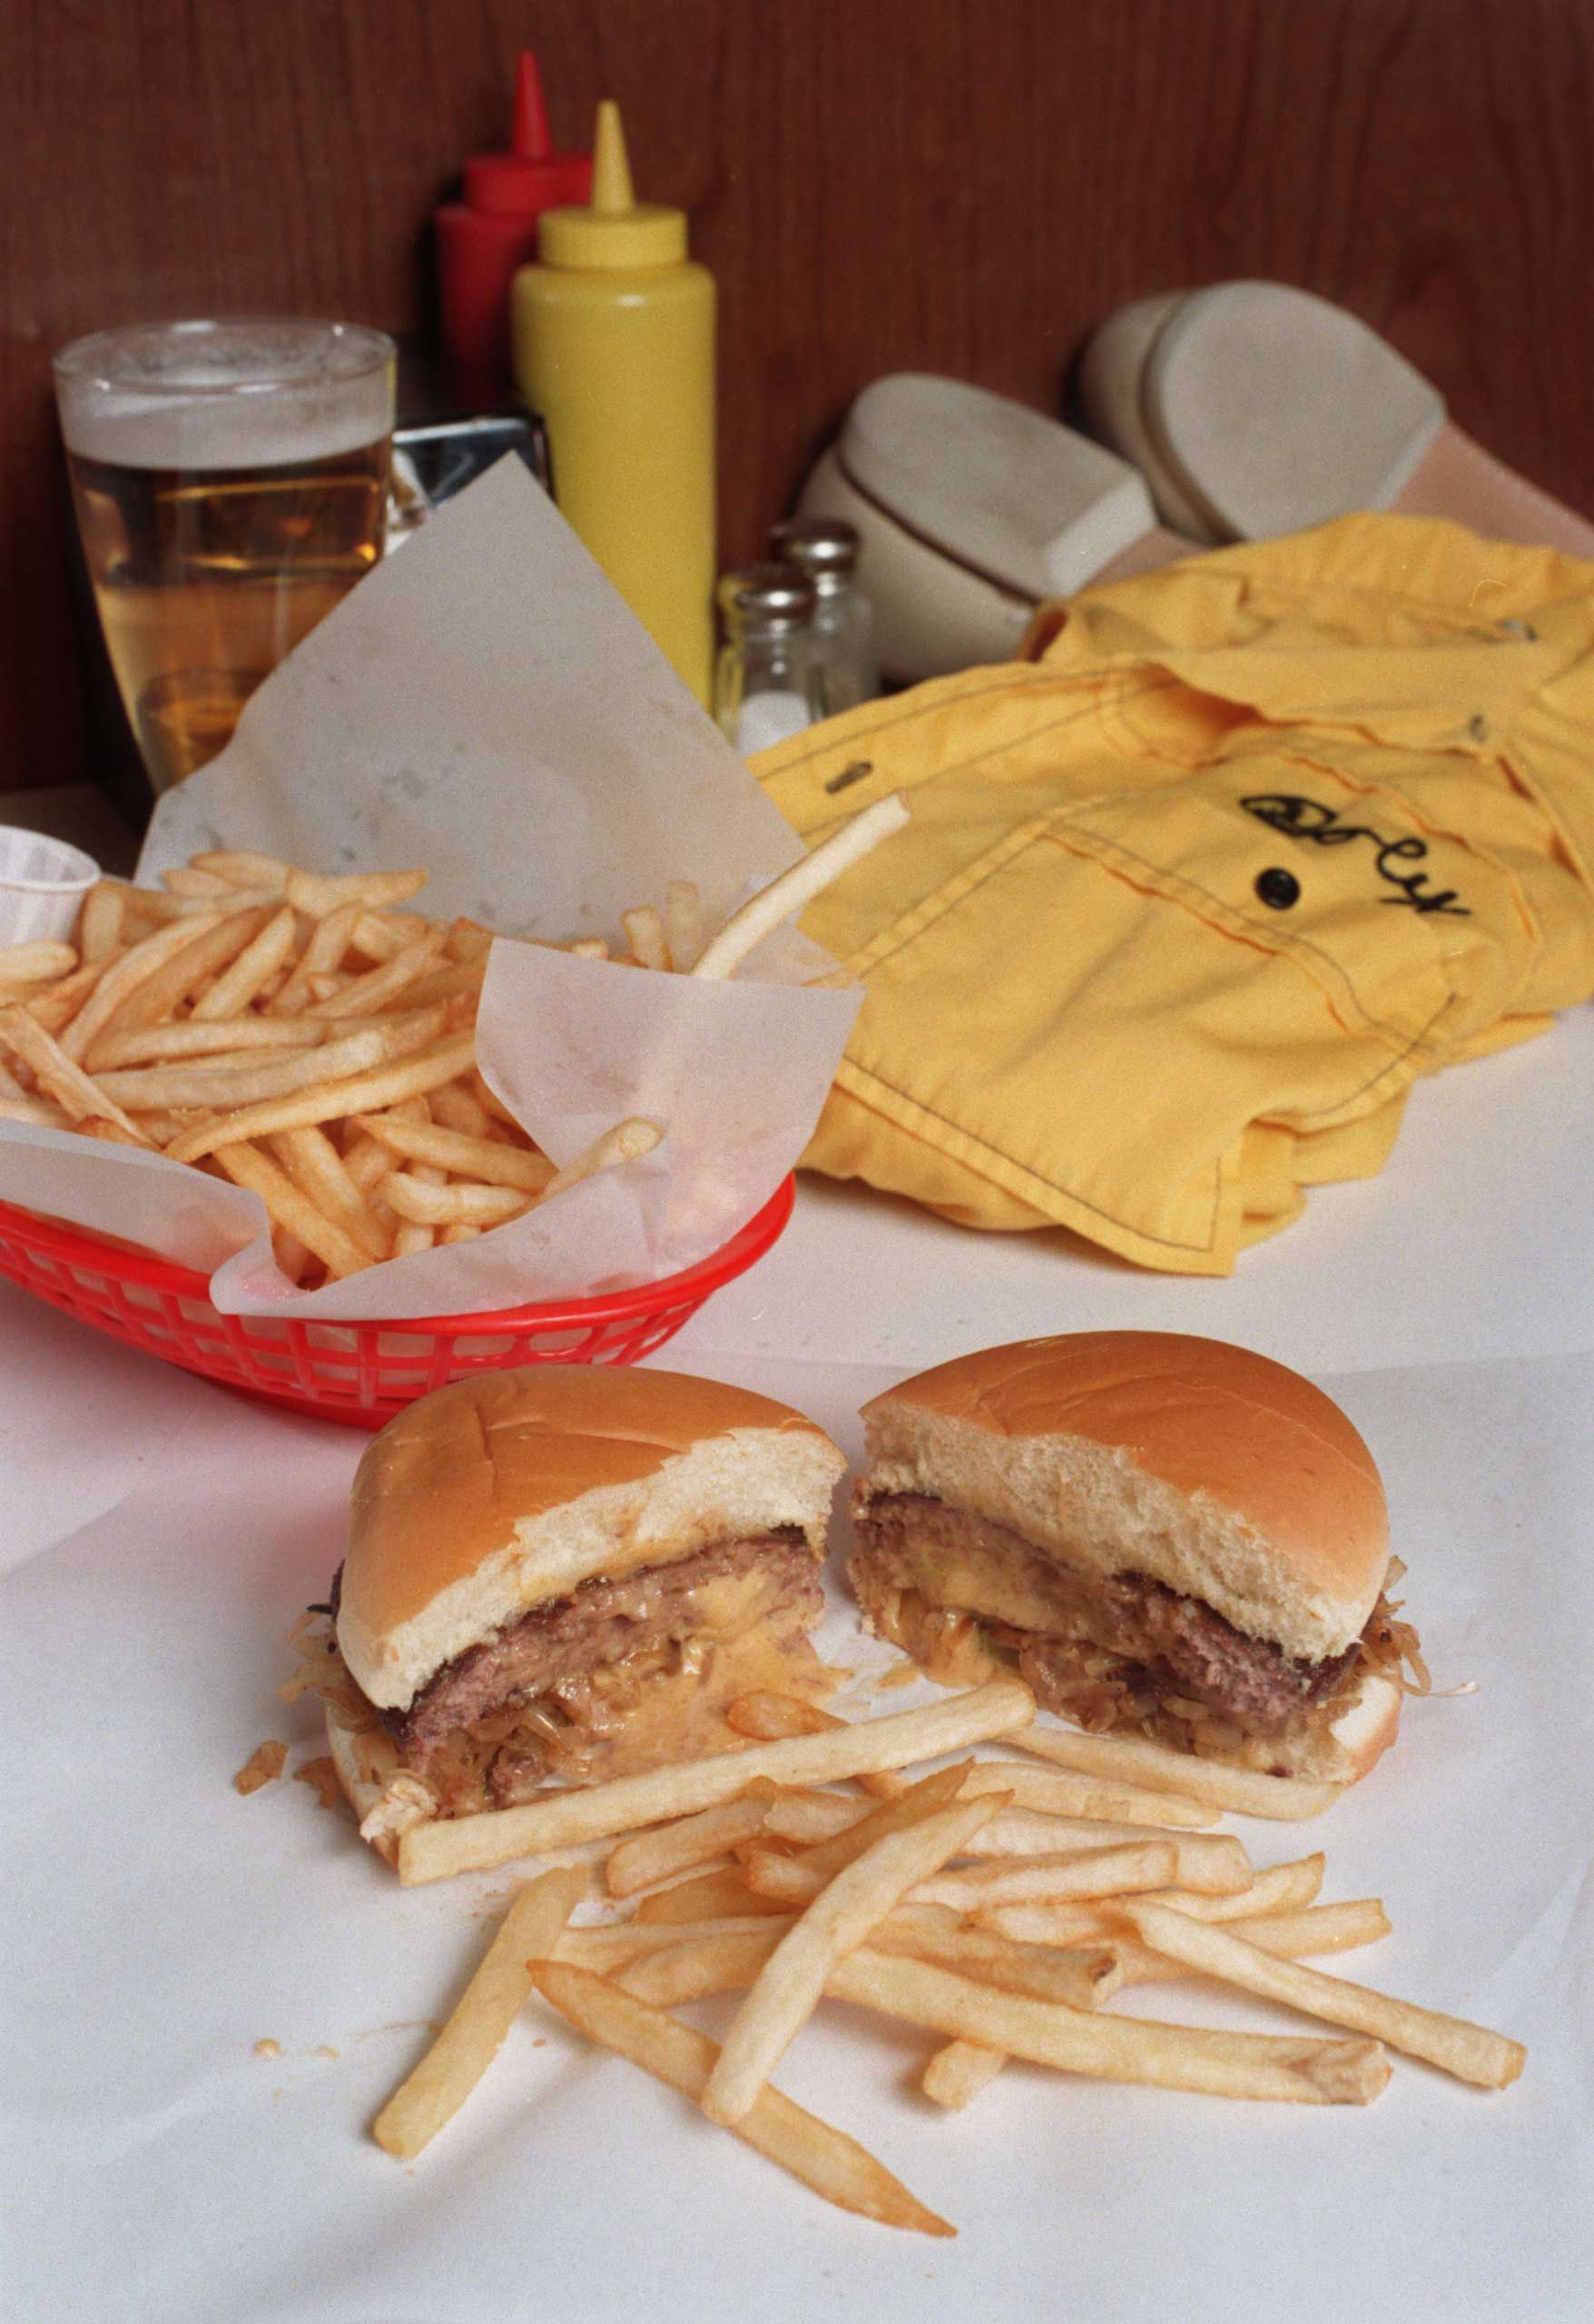 Although this twist on the cheeseburger—in which the cheese is melted inside the patty—was reportedly invented in the 1920s, when chefs were still experimenting with the burger, it gained national attention in 2008, thanks to a feud between two Minneapolis bars that both claim to have "invented" it. Since then, there have been numerous imitators, proving that a little innovation and a dash of hype is all it takes to reinvigorate enthusiasm for a classic. Correction: The original version of this story misstated the date of invention of the Jucy Lucy. It was put on the menu at Matt's in 1954.